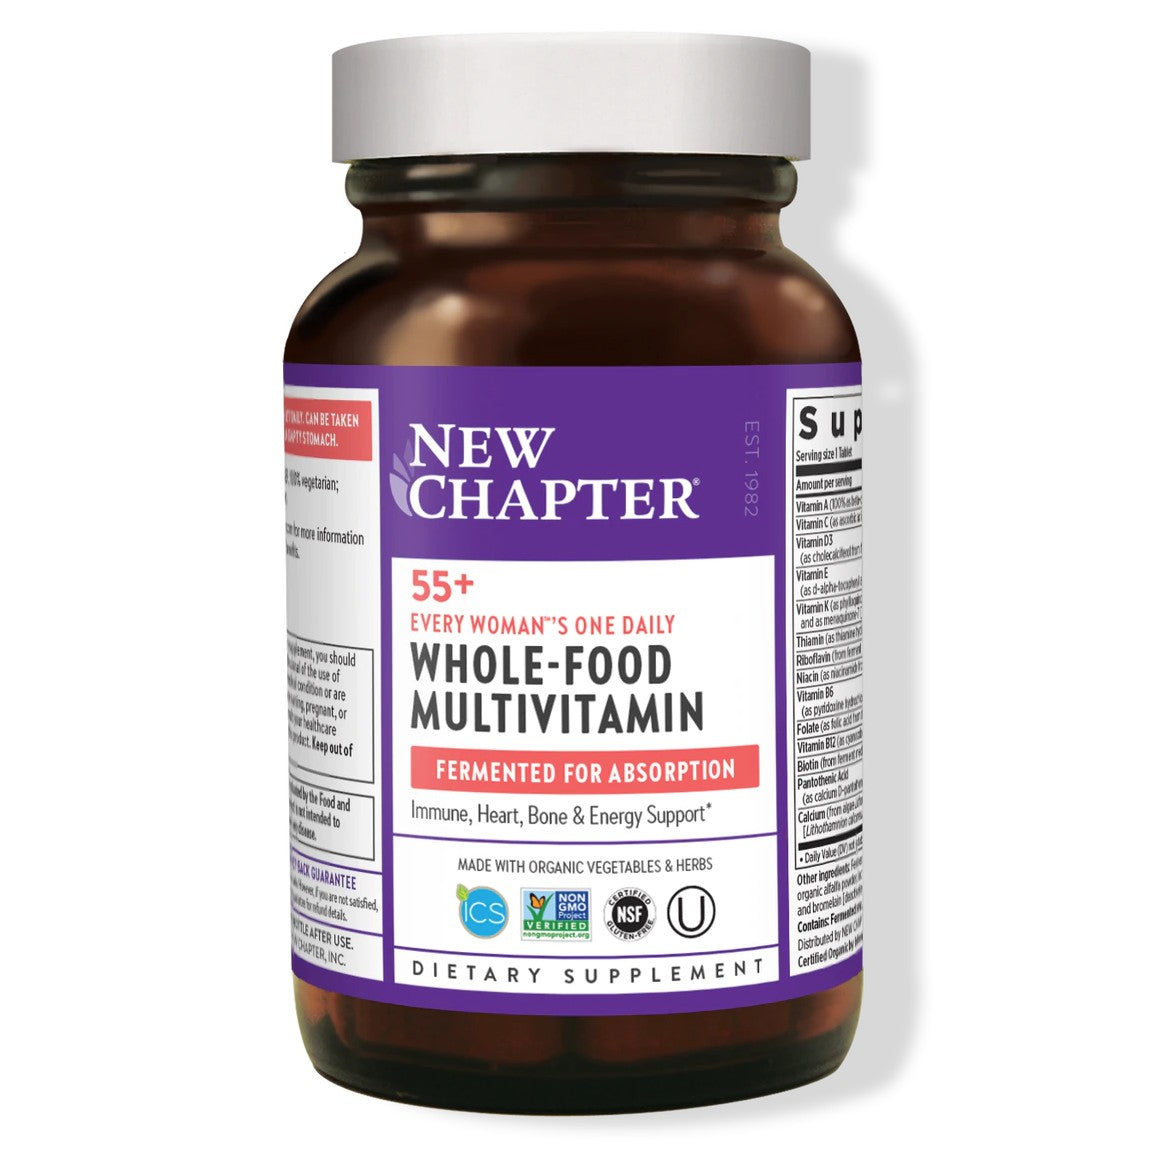 Every Woman's One Daily 55+ Multivitamin - My Village Green